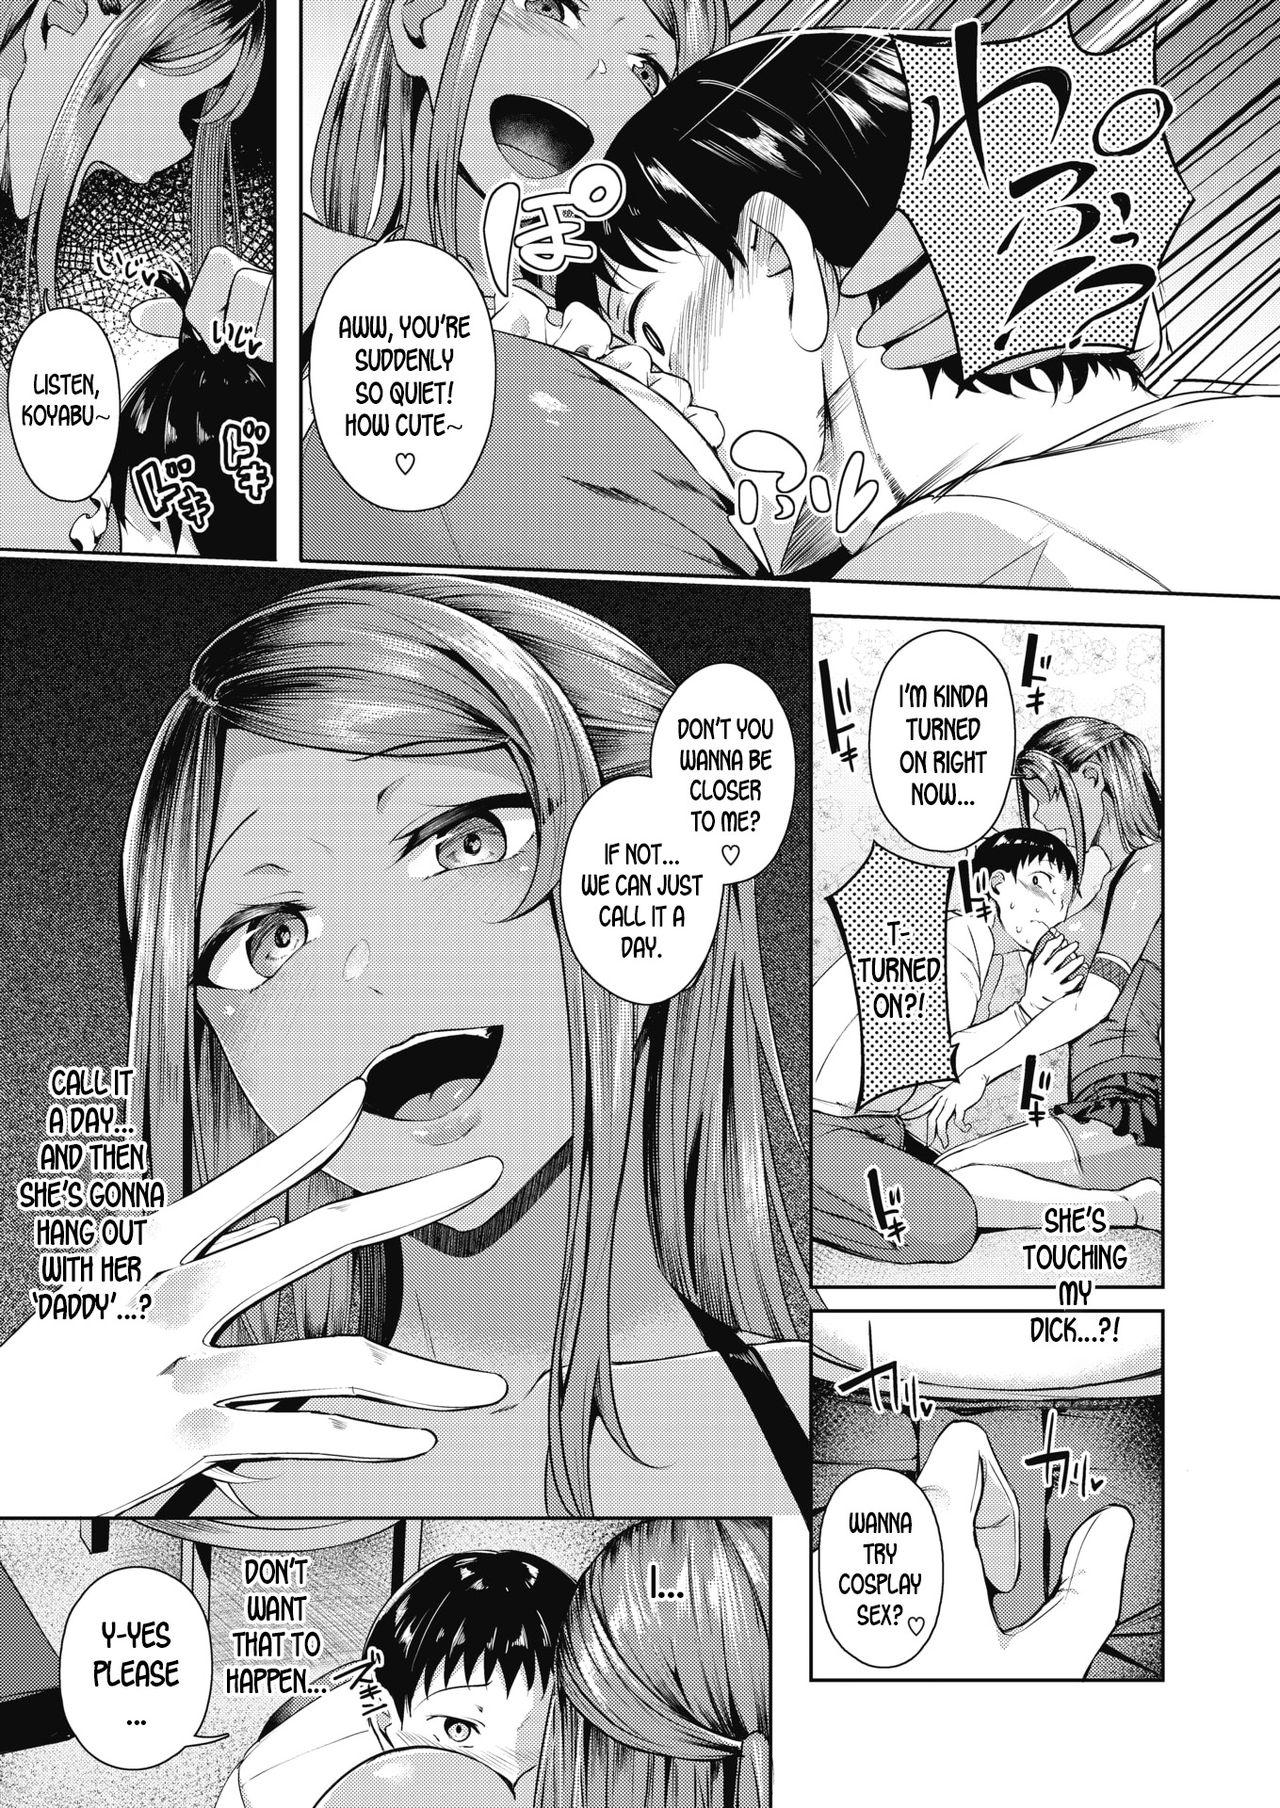 Girlfriend Class Caste Joui no Gal ga Layer Datta Ken | The Story Where the Gal in the Upper Caste of the Class Turns Out To Be a Cosplayer Dom - Page 9